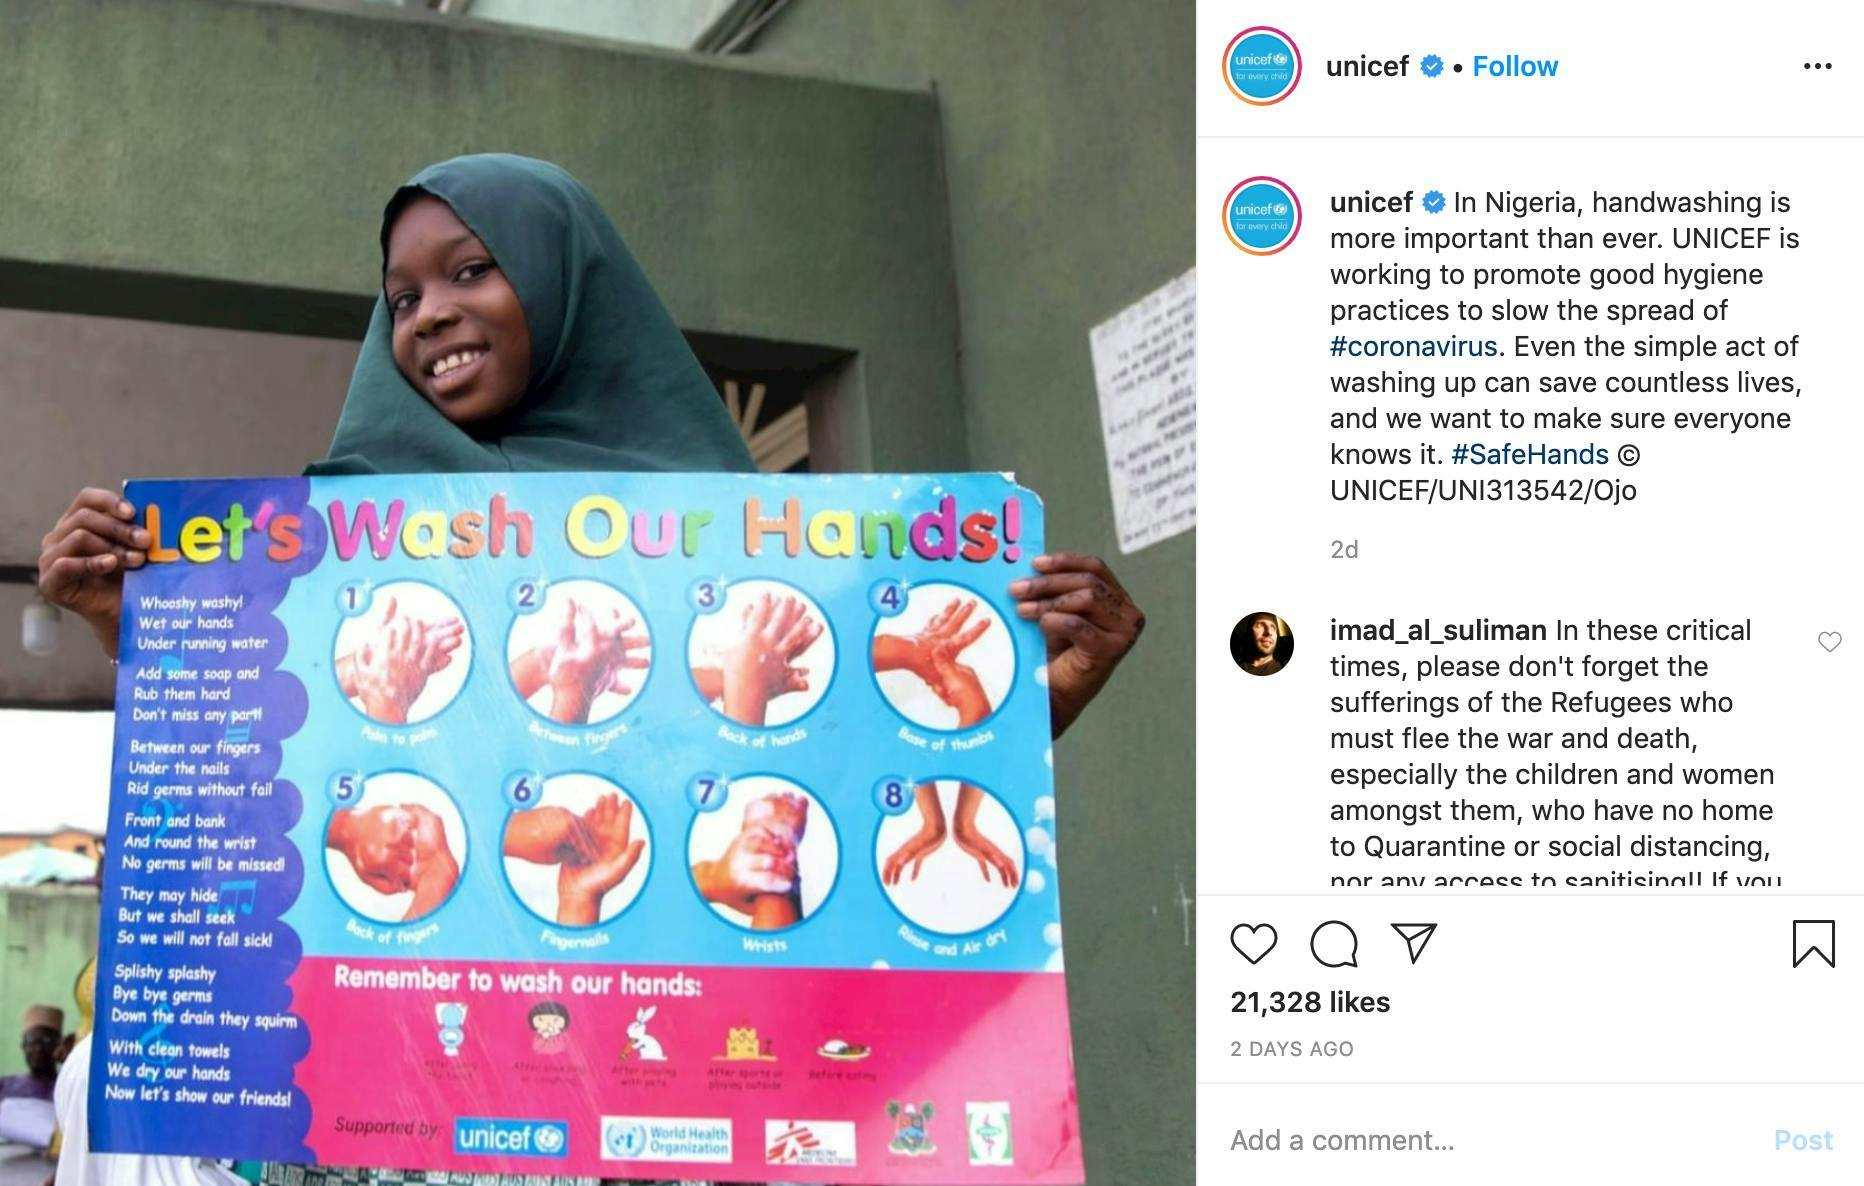 Instagram post from UNICEF